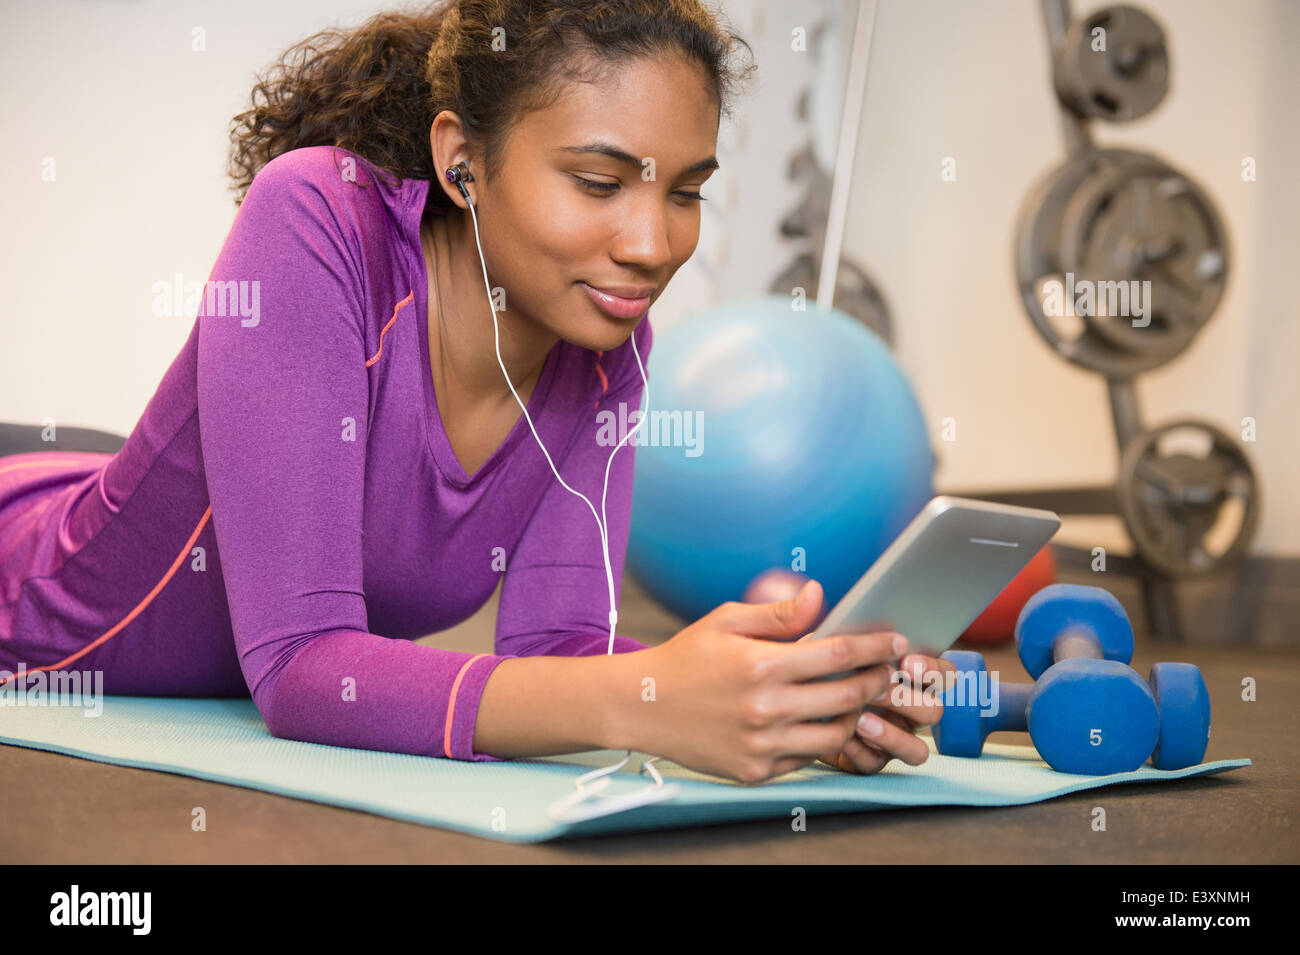 Mixed race woman using digital tablet to exercise Stock Photo